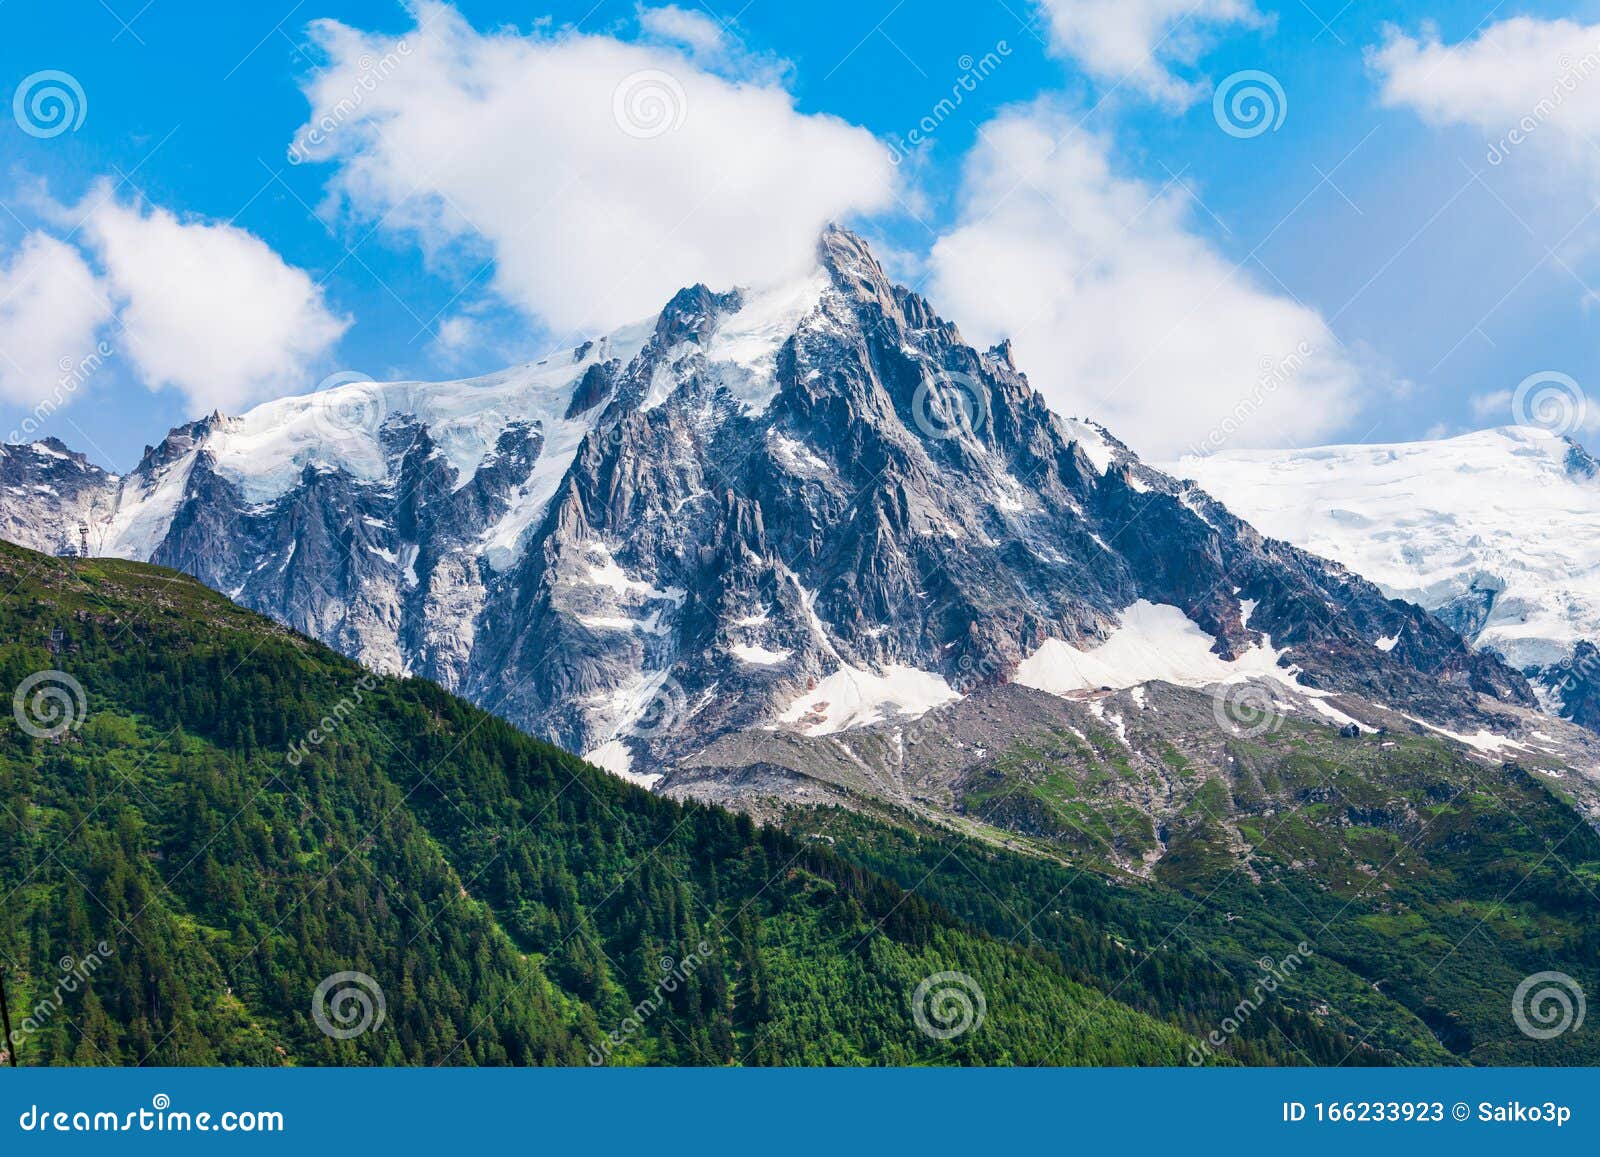 The highest mountain in europe